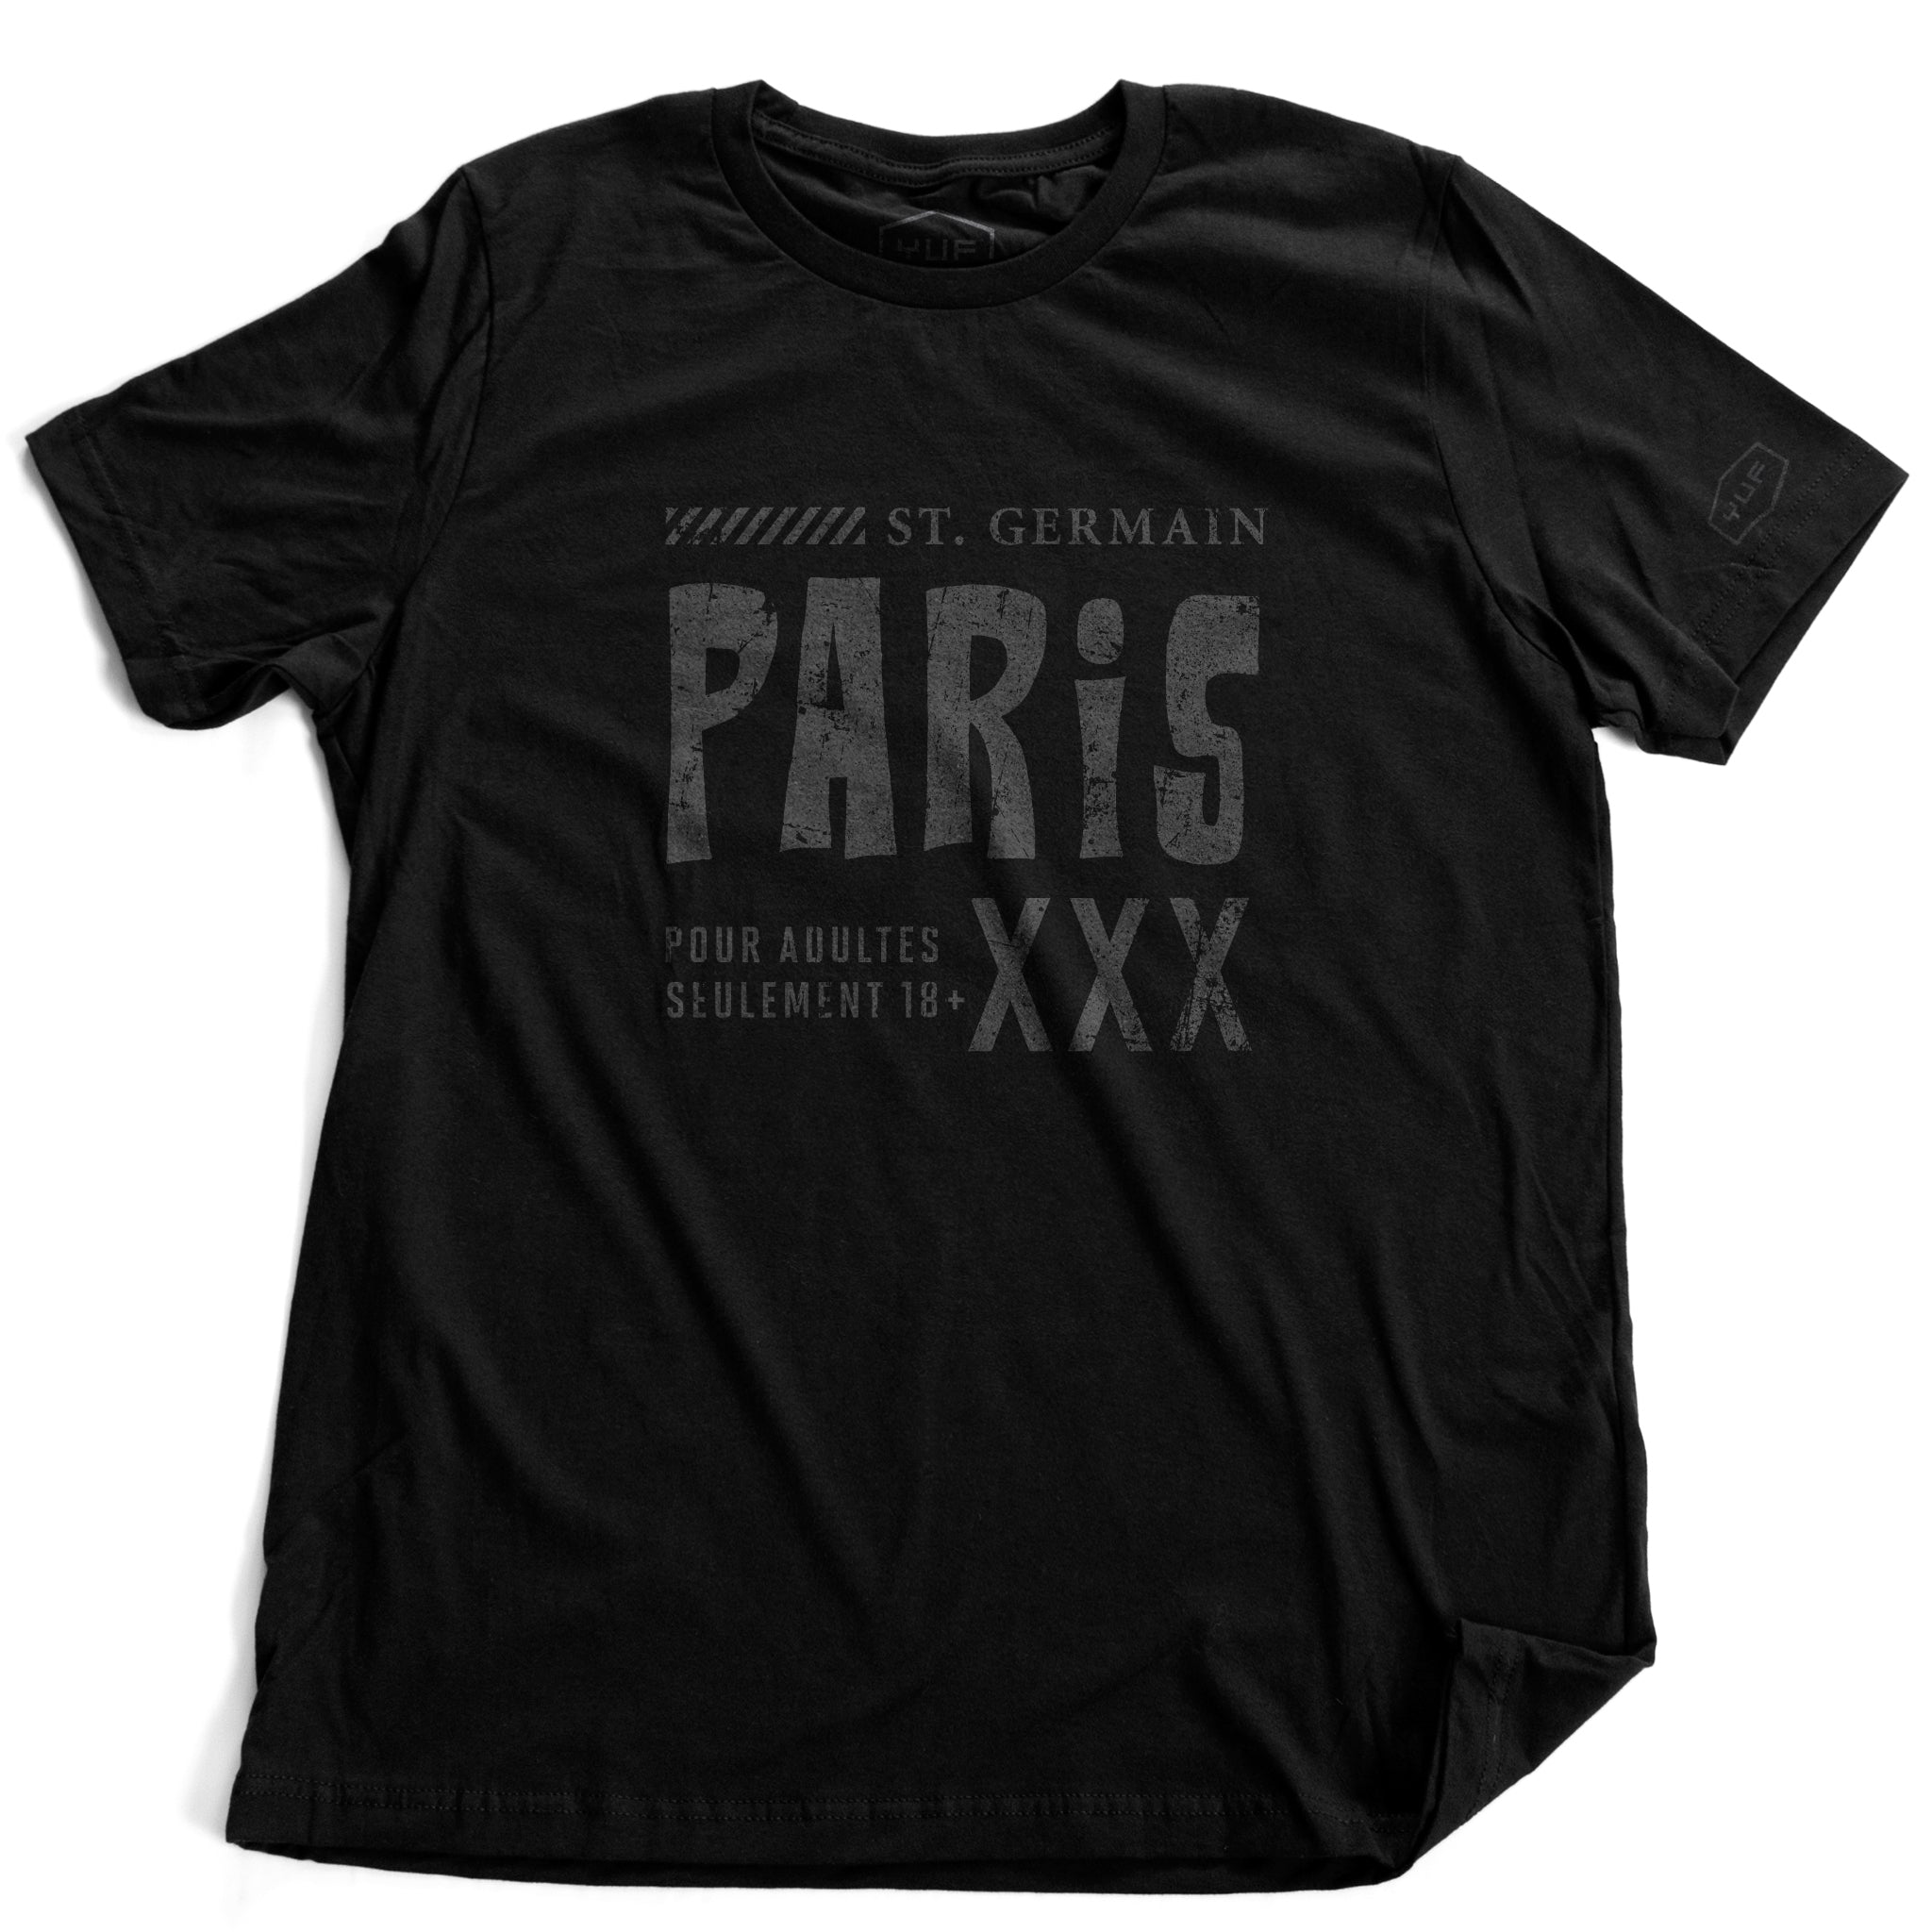 A fashionable, vintage-inspired retro graphic t-shirt in Classic Black. On the shirt is a sarcastic promotion of the adult entertainment district in St. Germain, with the large word “PARIS” and “XXX” most prominent. By fashion brand YUF. From wolfsaint.net